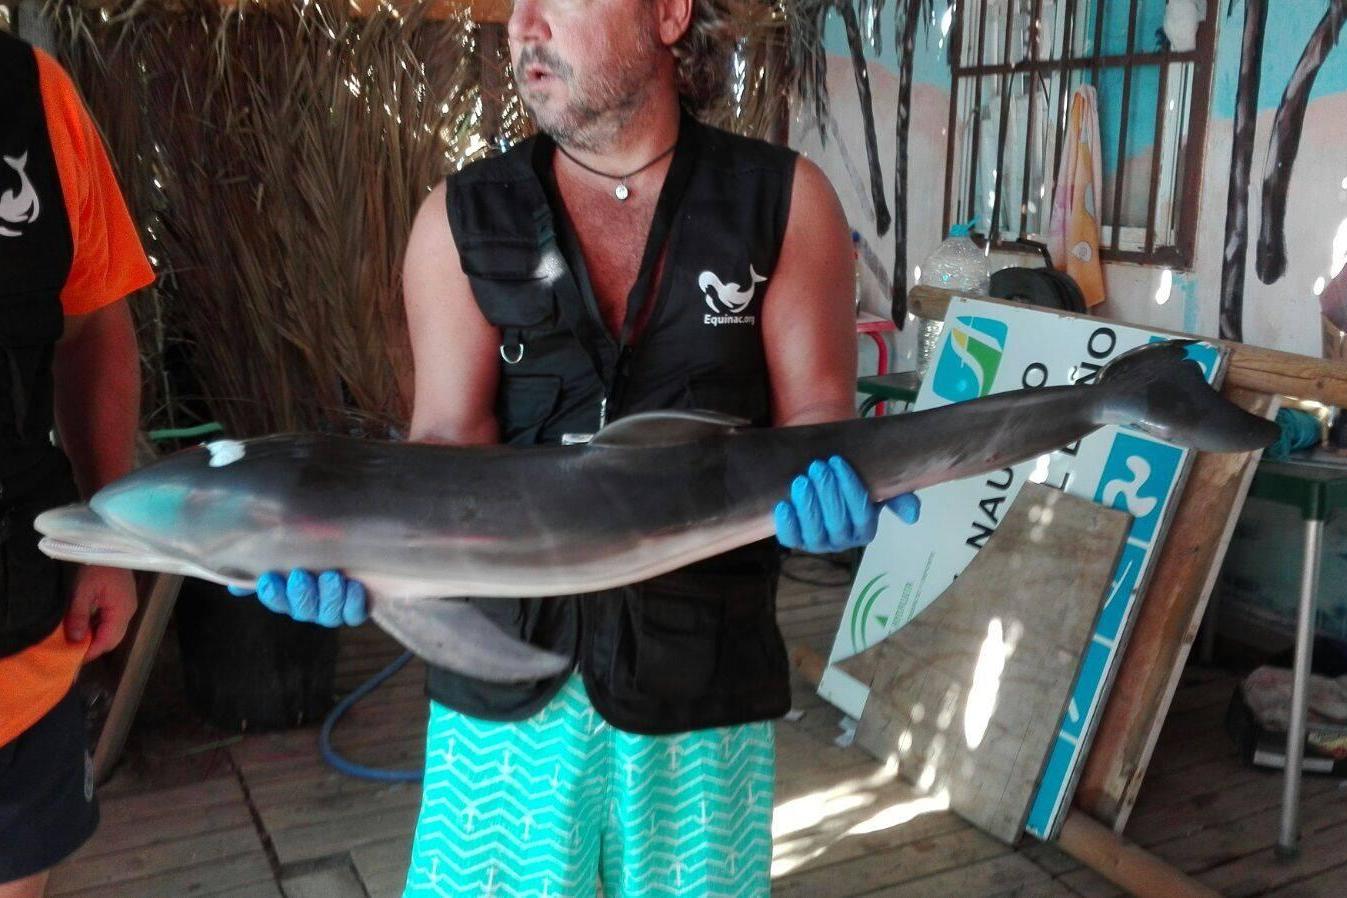 An Equinac rescuer with the dolphin's body (Equinac )